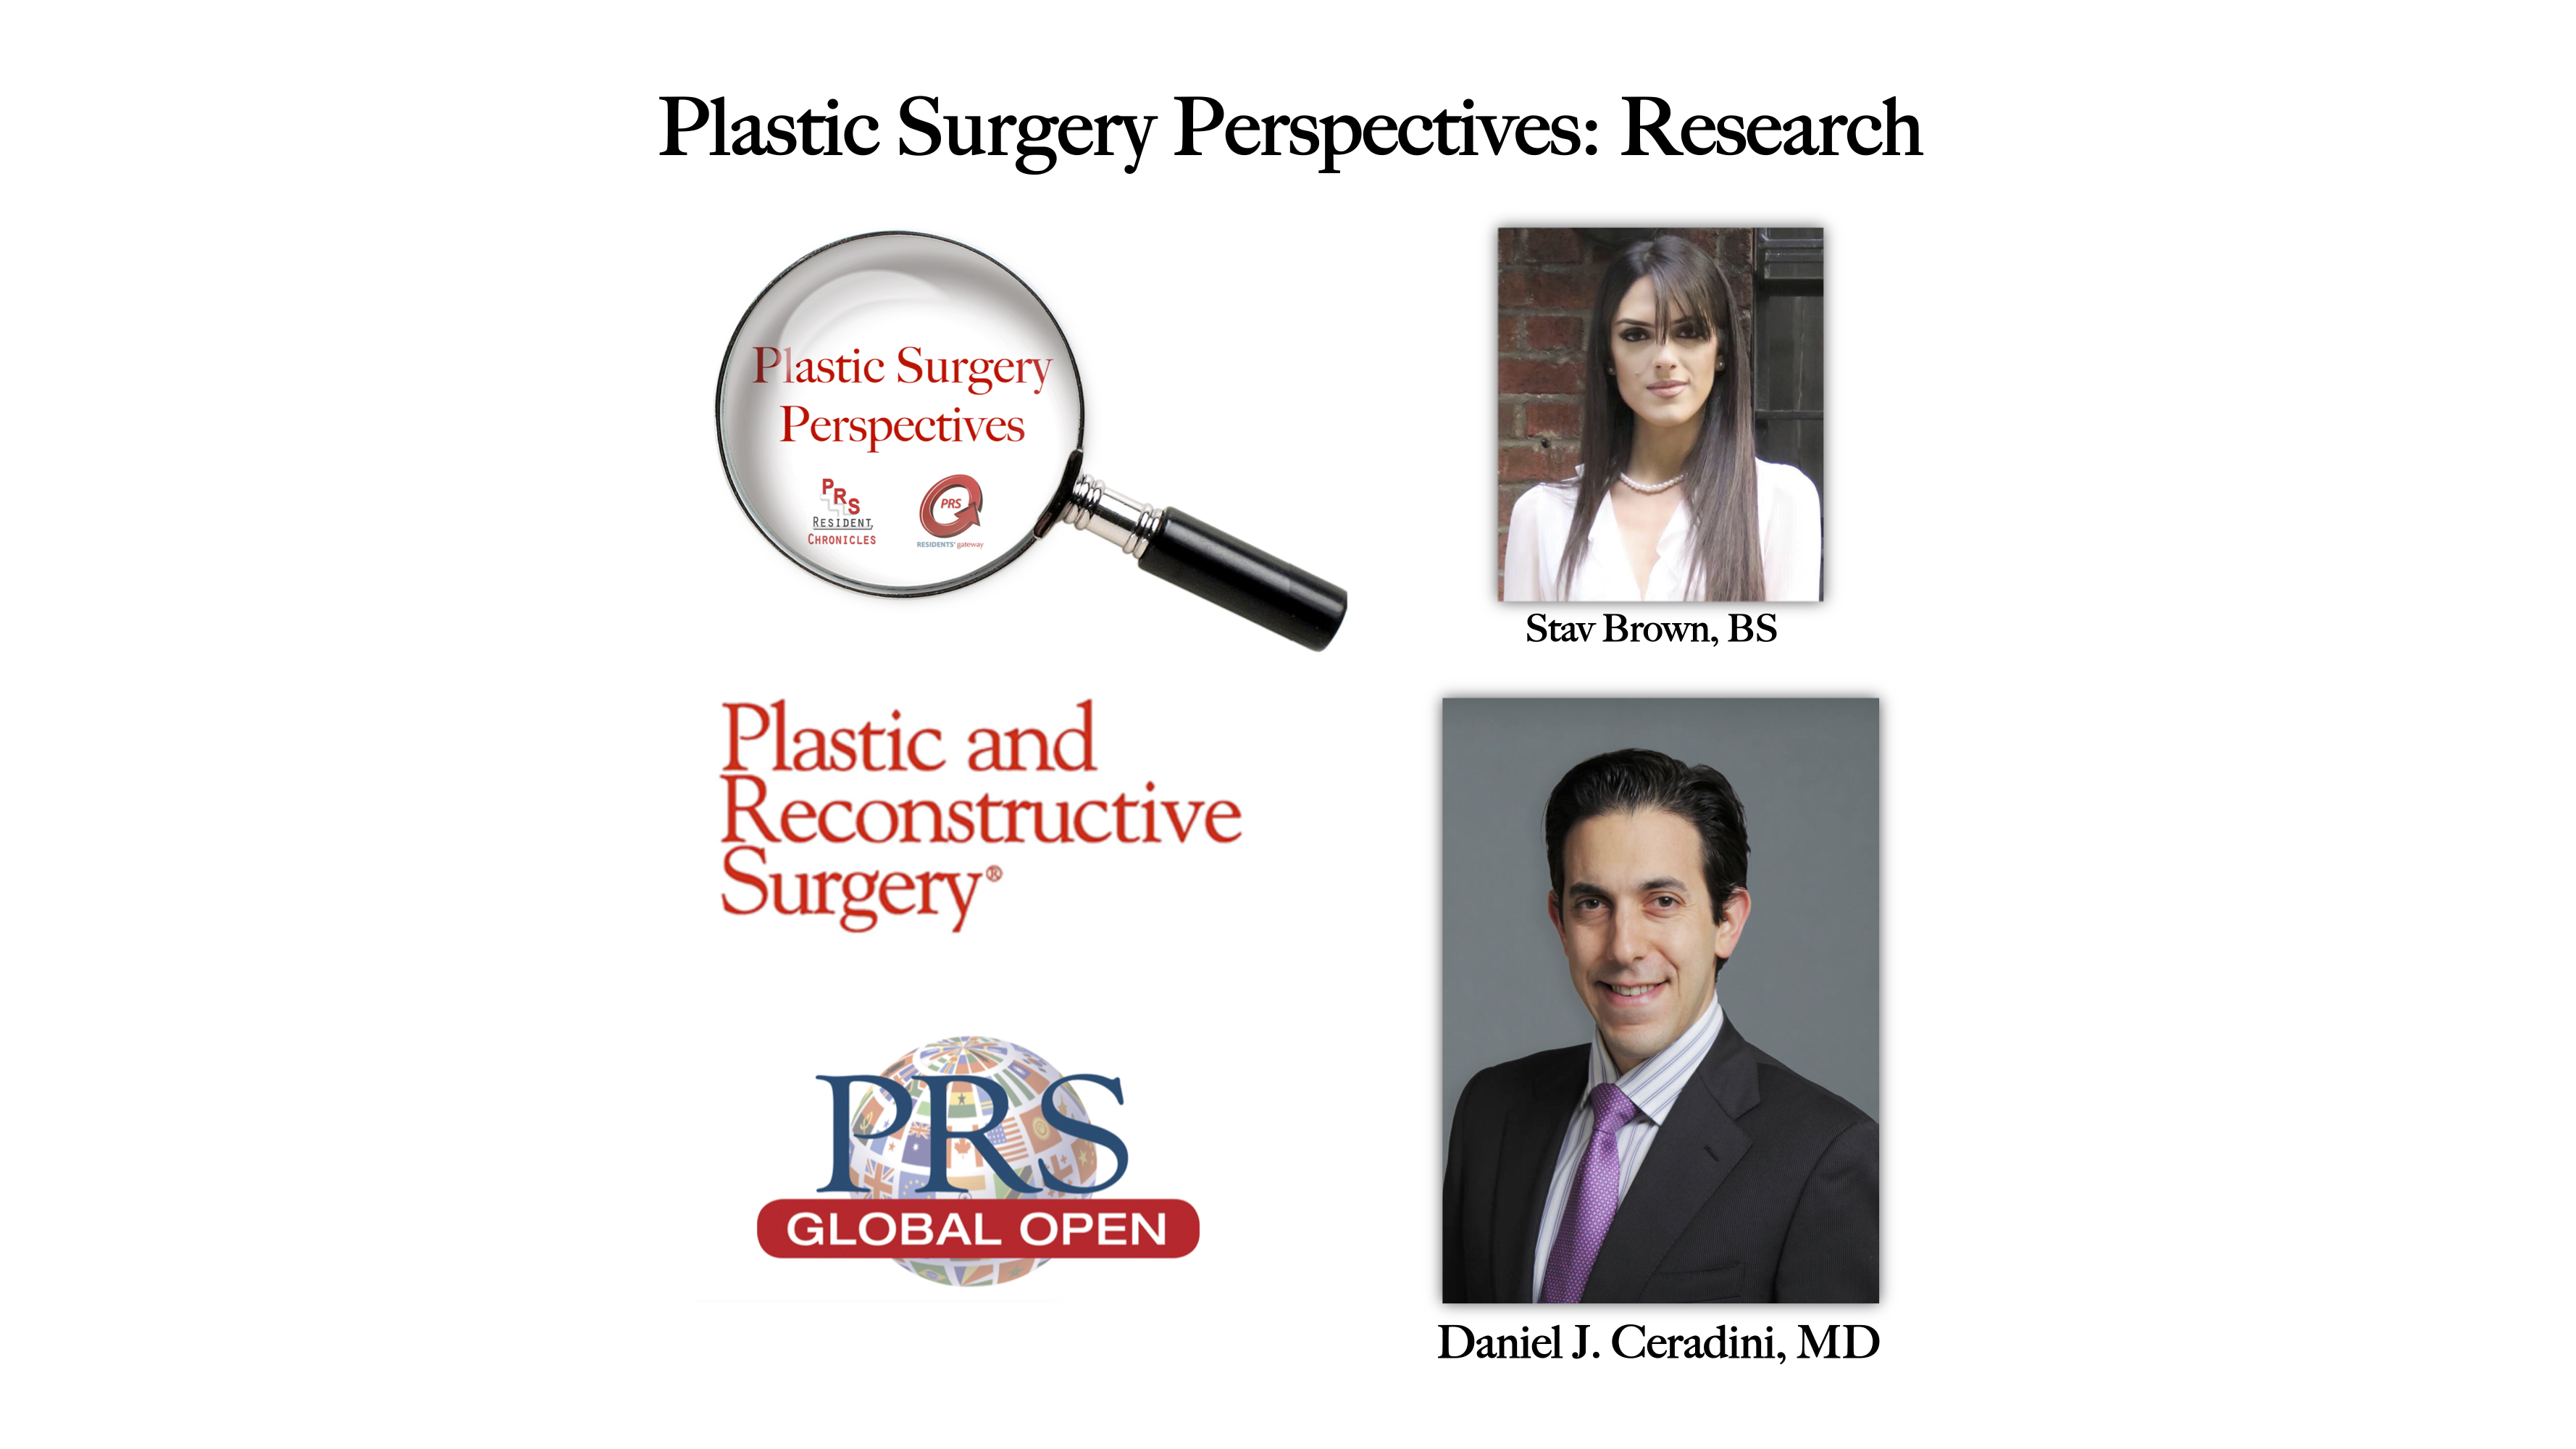 Plastic Surgery Perspectives: Research—Interview with Dr. Daniel J.
Ceradini